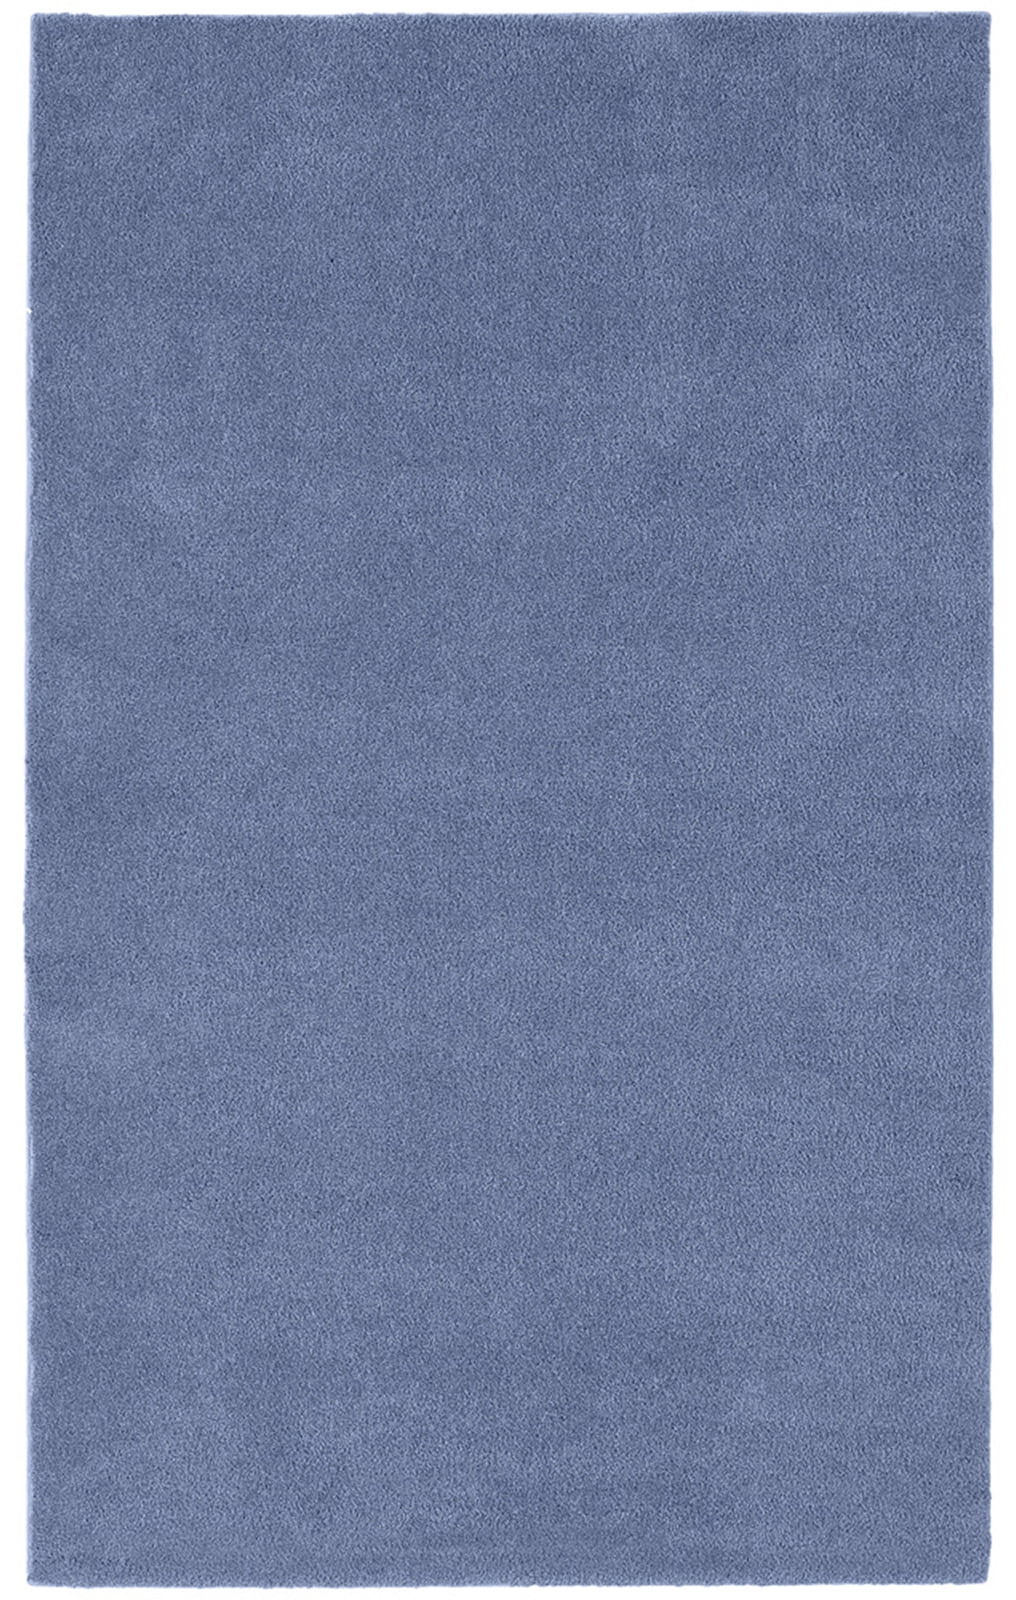 BLUE-BATHROOM "WALL TO WALL" BATH CARPET-RUGS-SIZE=5 X 6-CUT TO FIT--BEST DEAL 